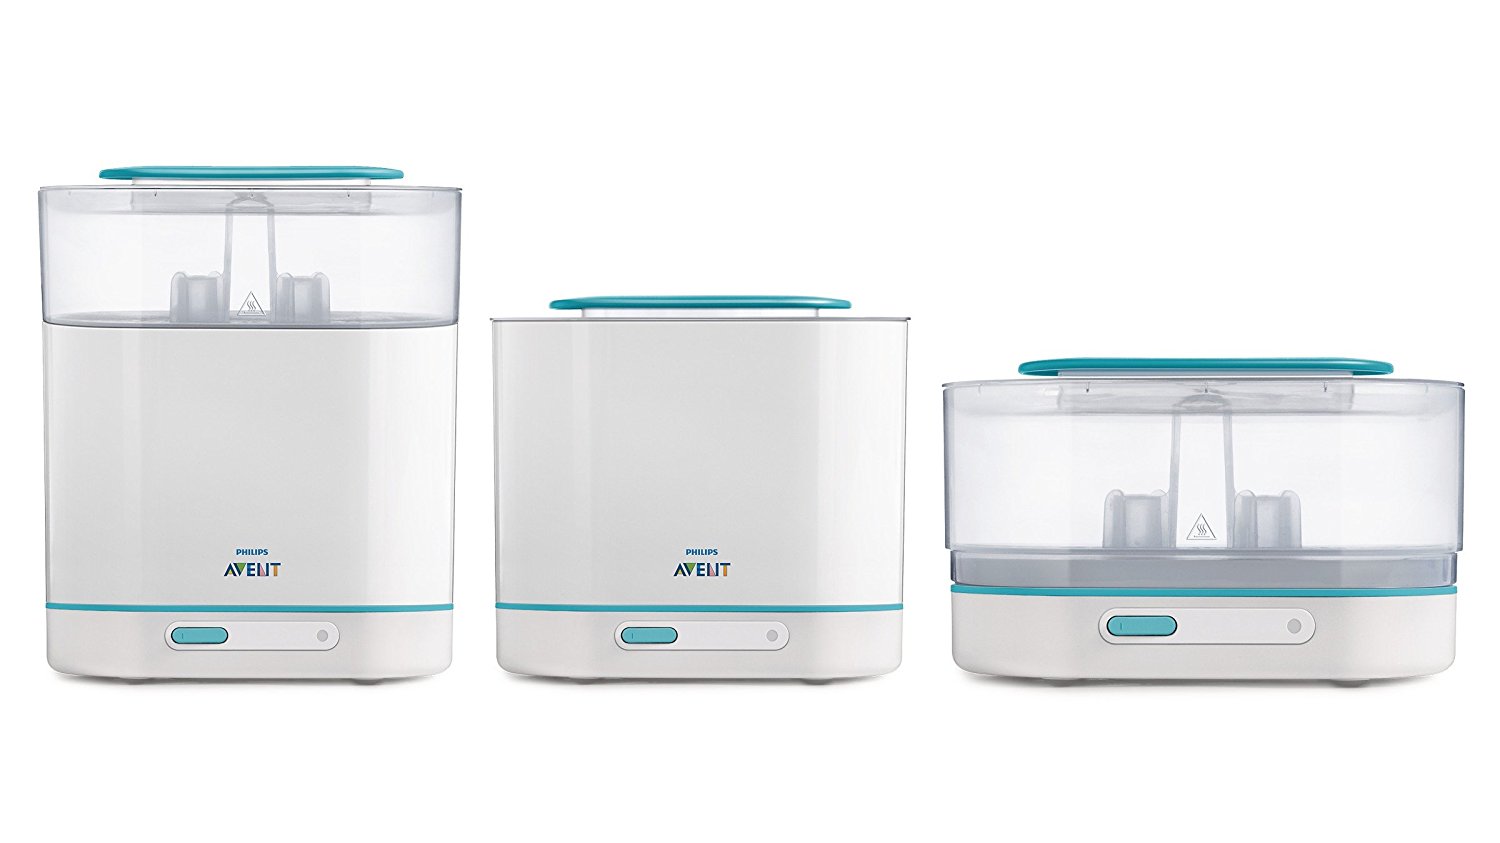 You are reading: Product Review: Philips Avent 3-in-1 Electric Steam Sterilizer and How to Sterilize Baby Bottles!